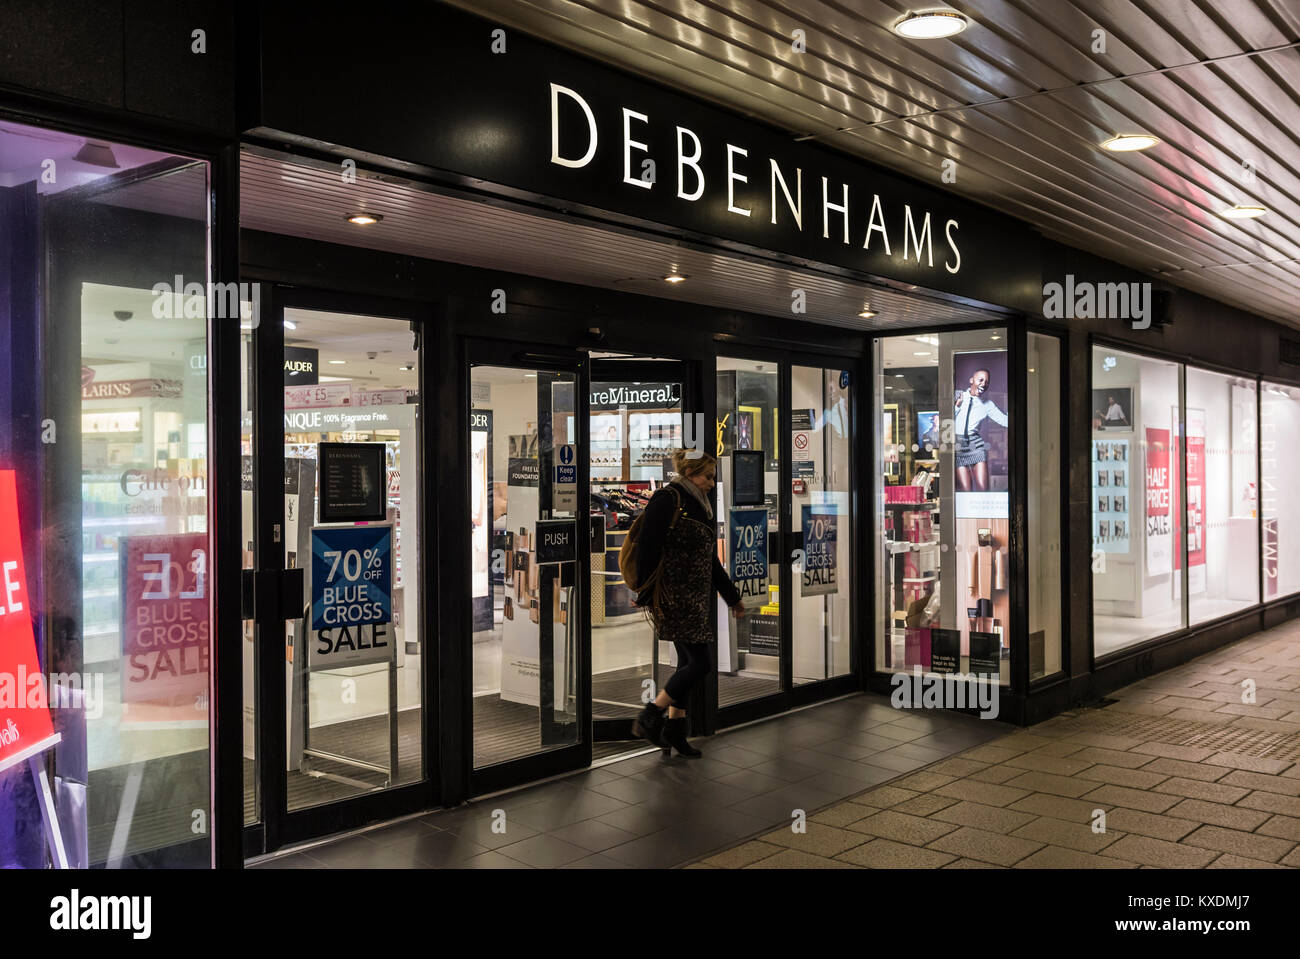 Debenhams shop front entrance open after dark in Worthing, West Sussex, England, UK. Retail store. Stock Photo